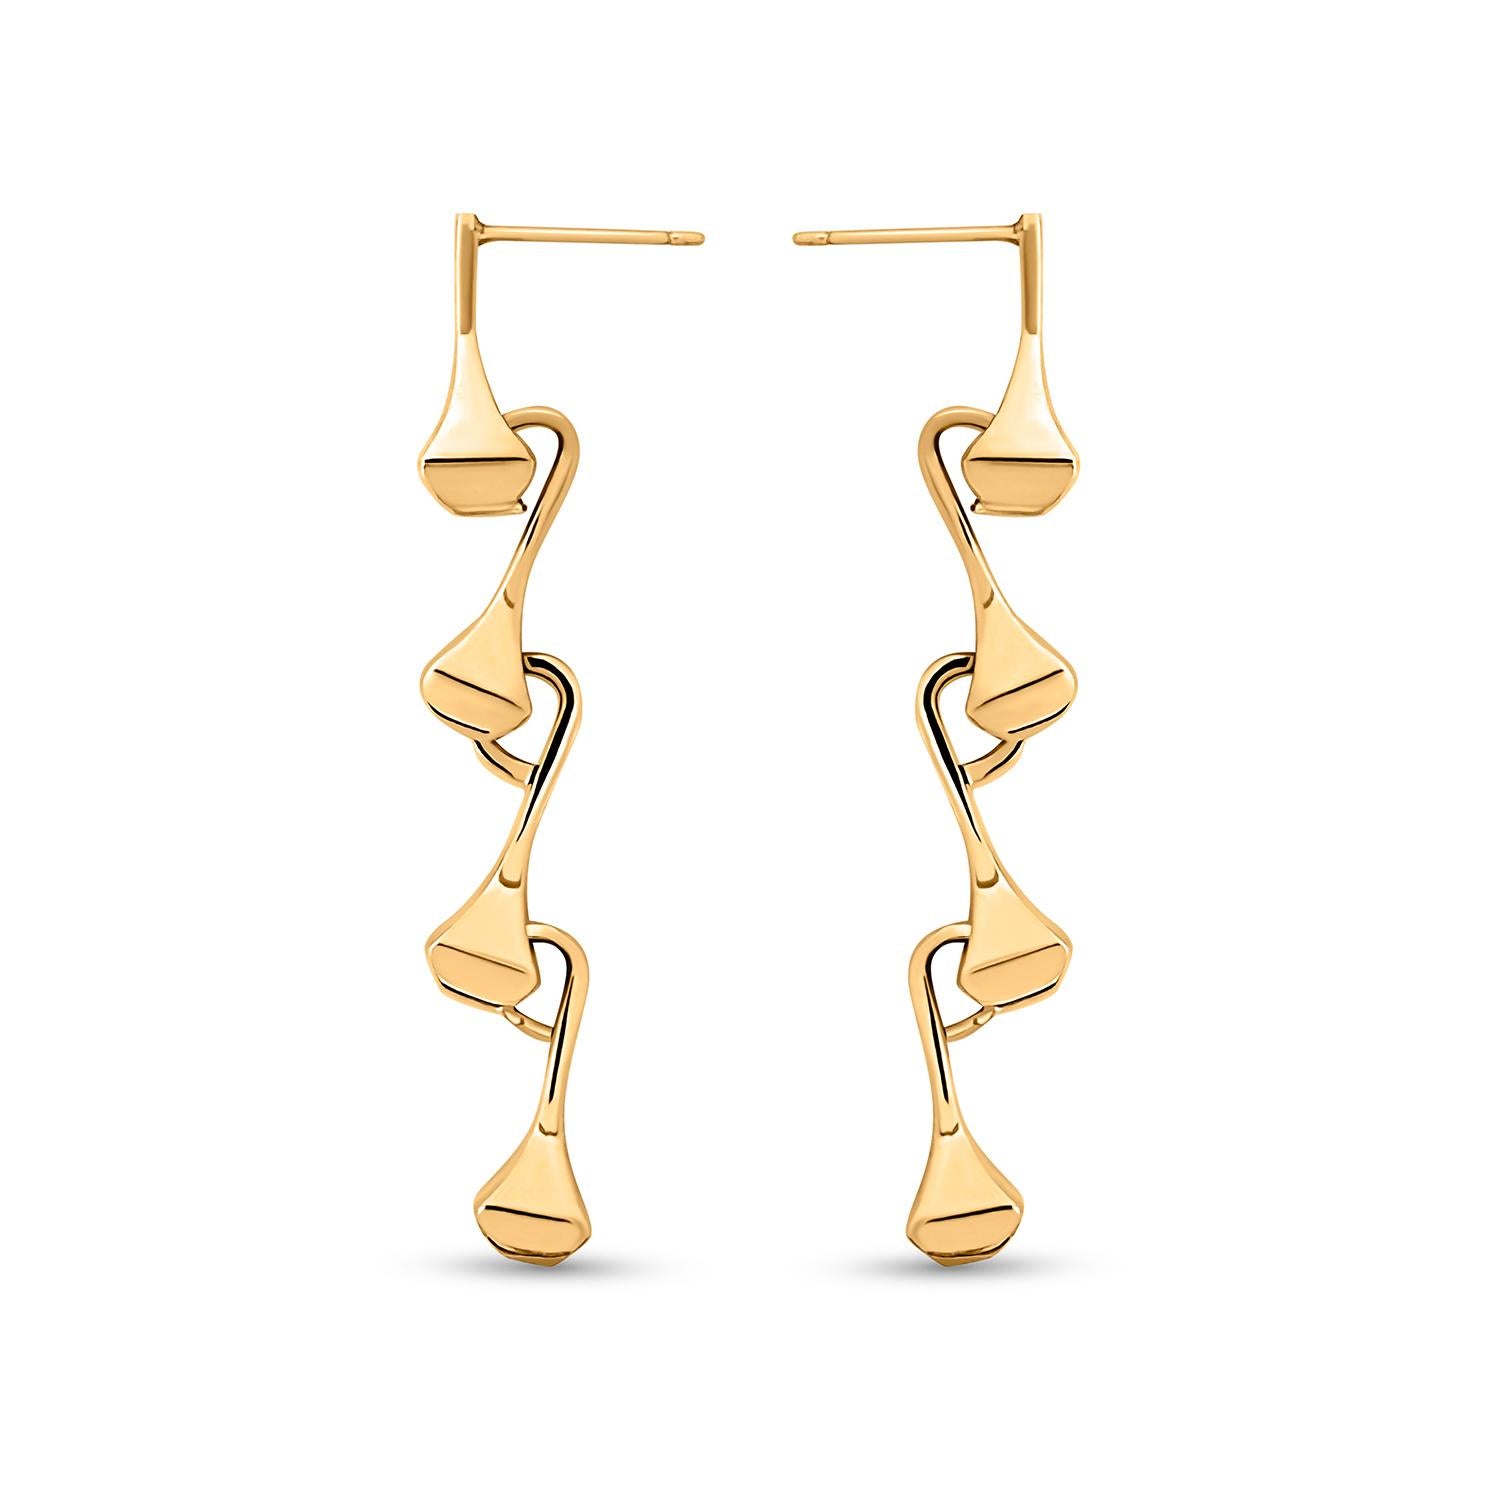 The bold design is inspired by the equestrian world. These genderless drop link earrings exude effortless style. Sold as a pair.  
Metal: 9k yellow gold 
Finish: polished
Length: 5.5 cm
Sold out at the moment. Available upon order. Lead time up to 5